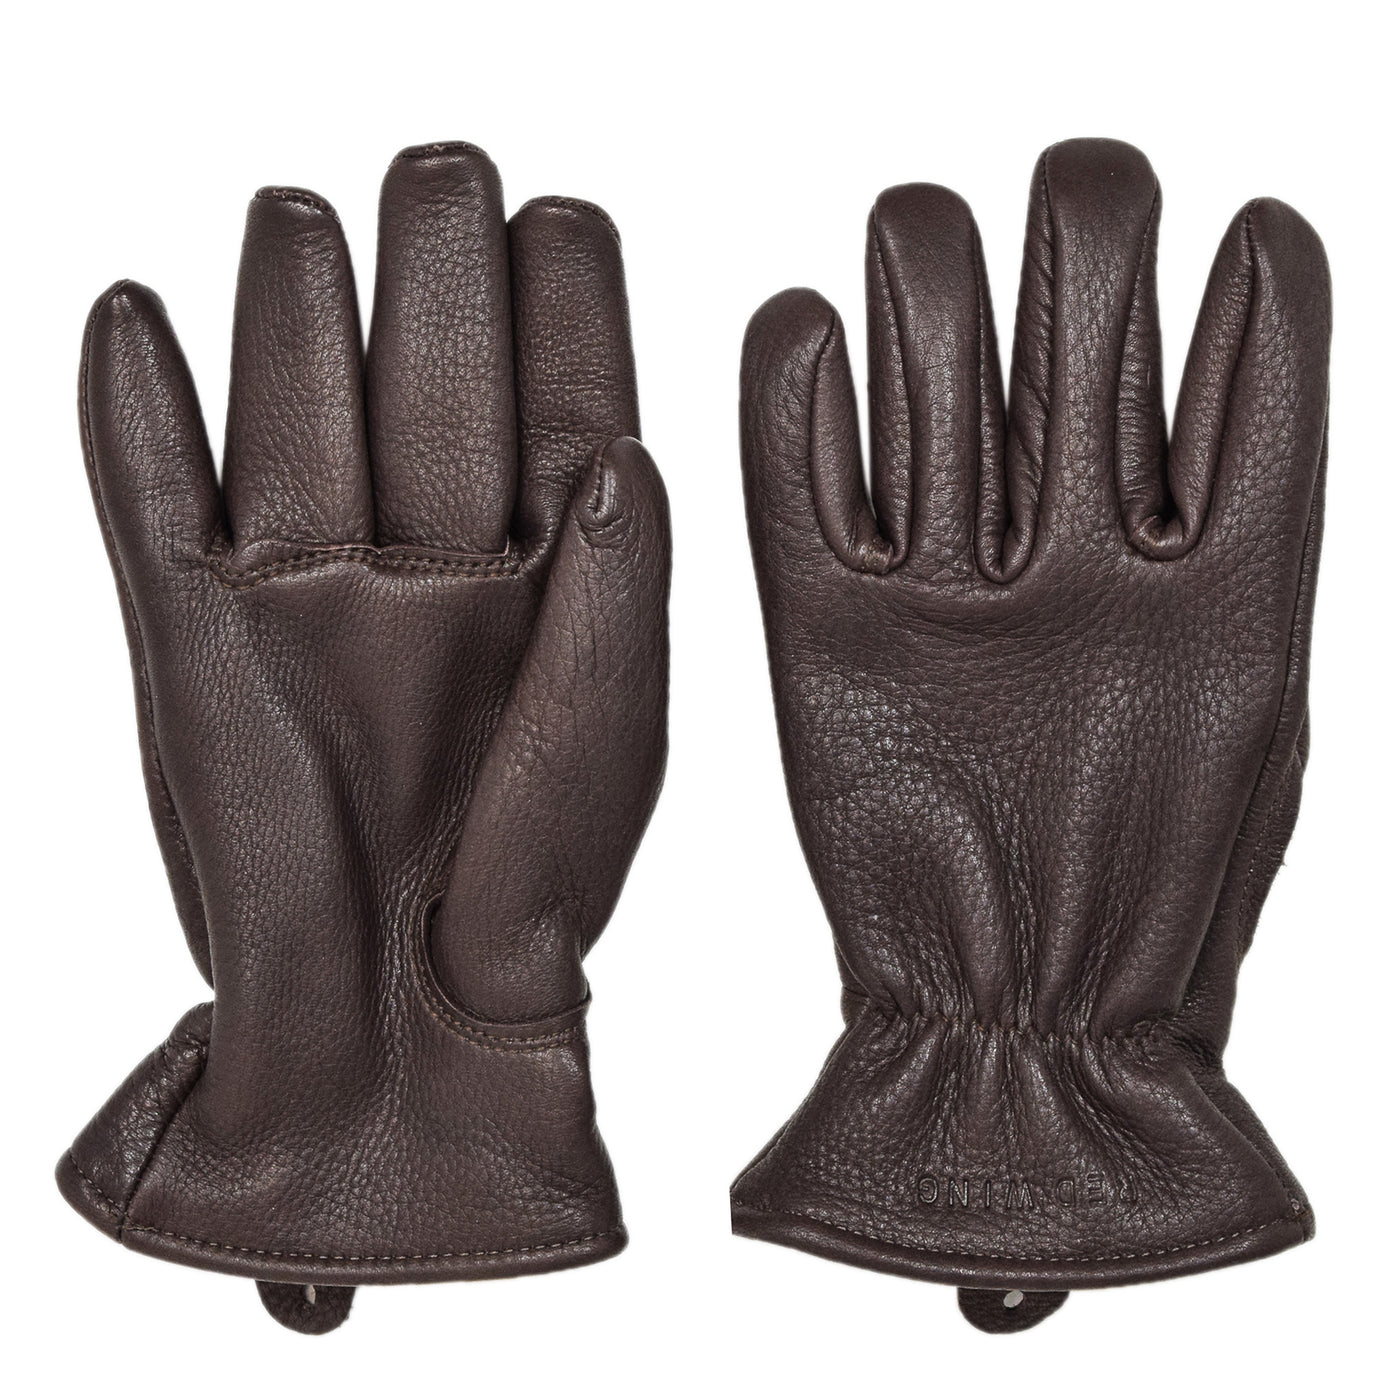 Red Wing Lined Buckskin Leather Gloves Brown FRONT AND BACK